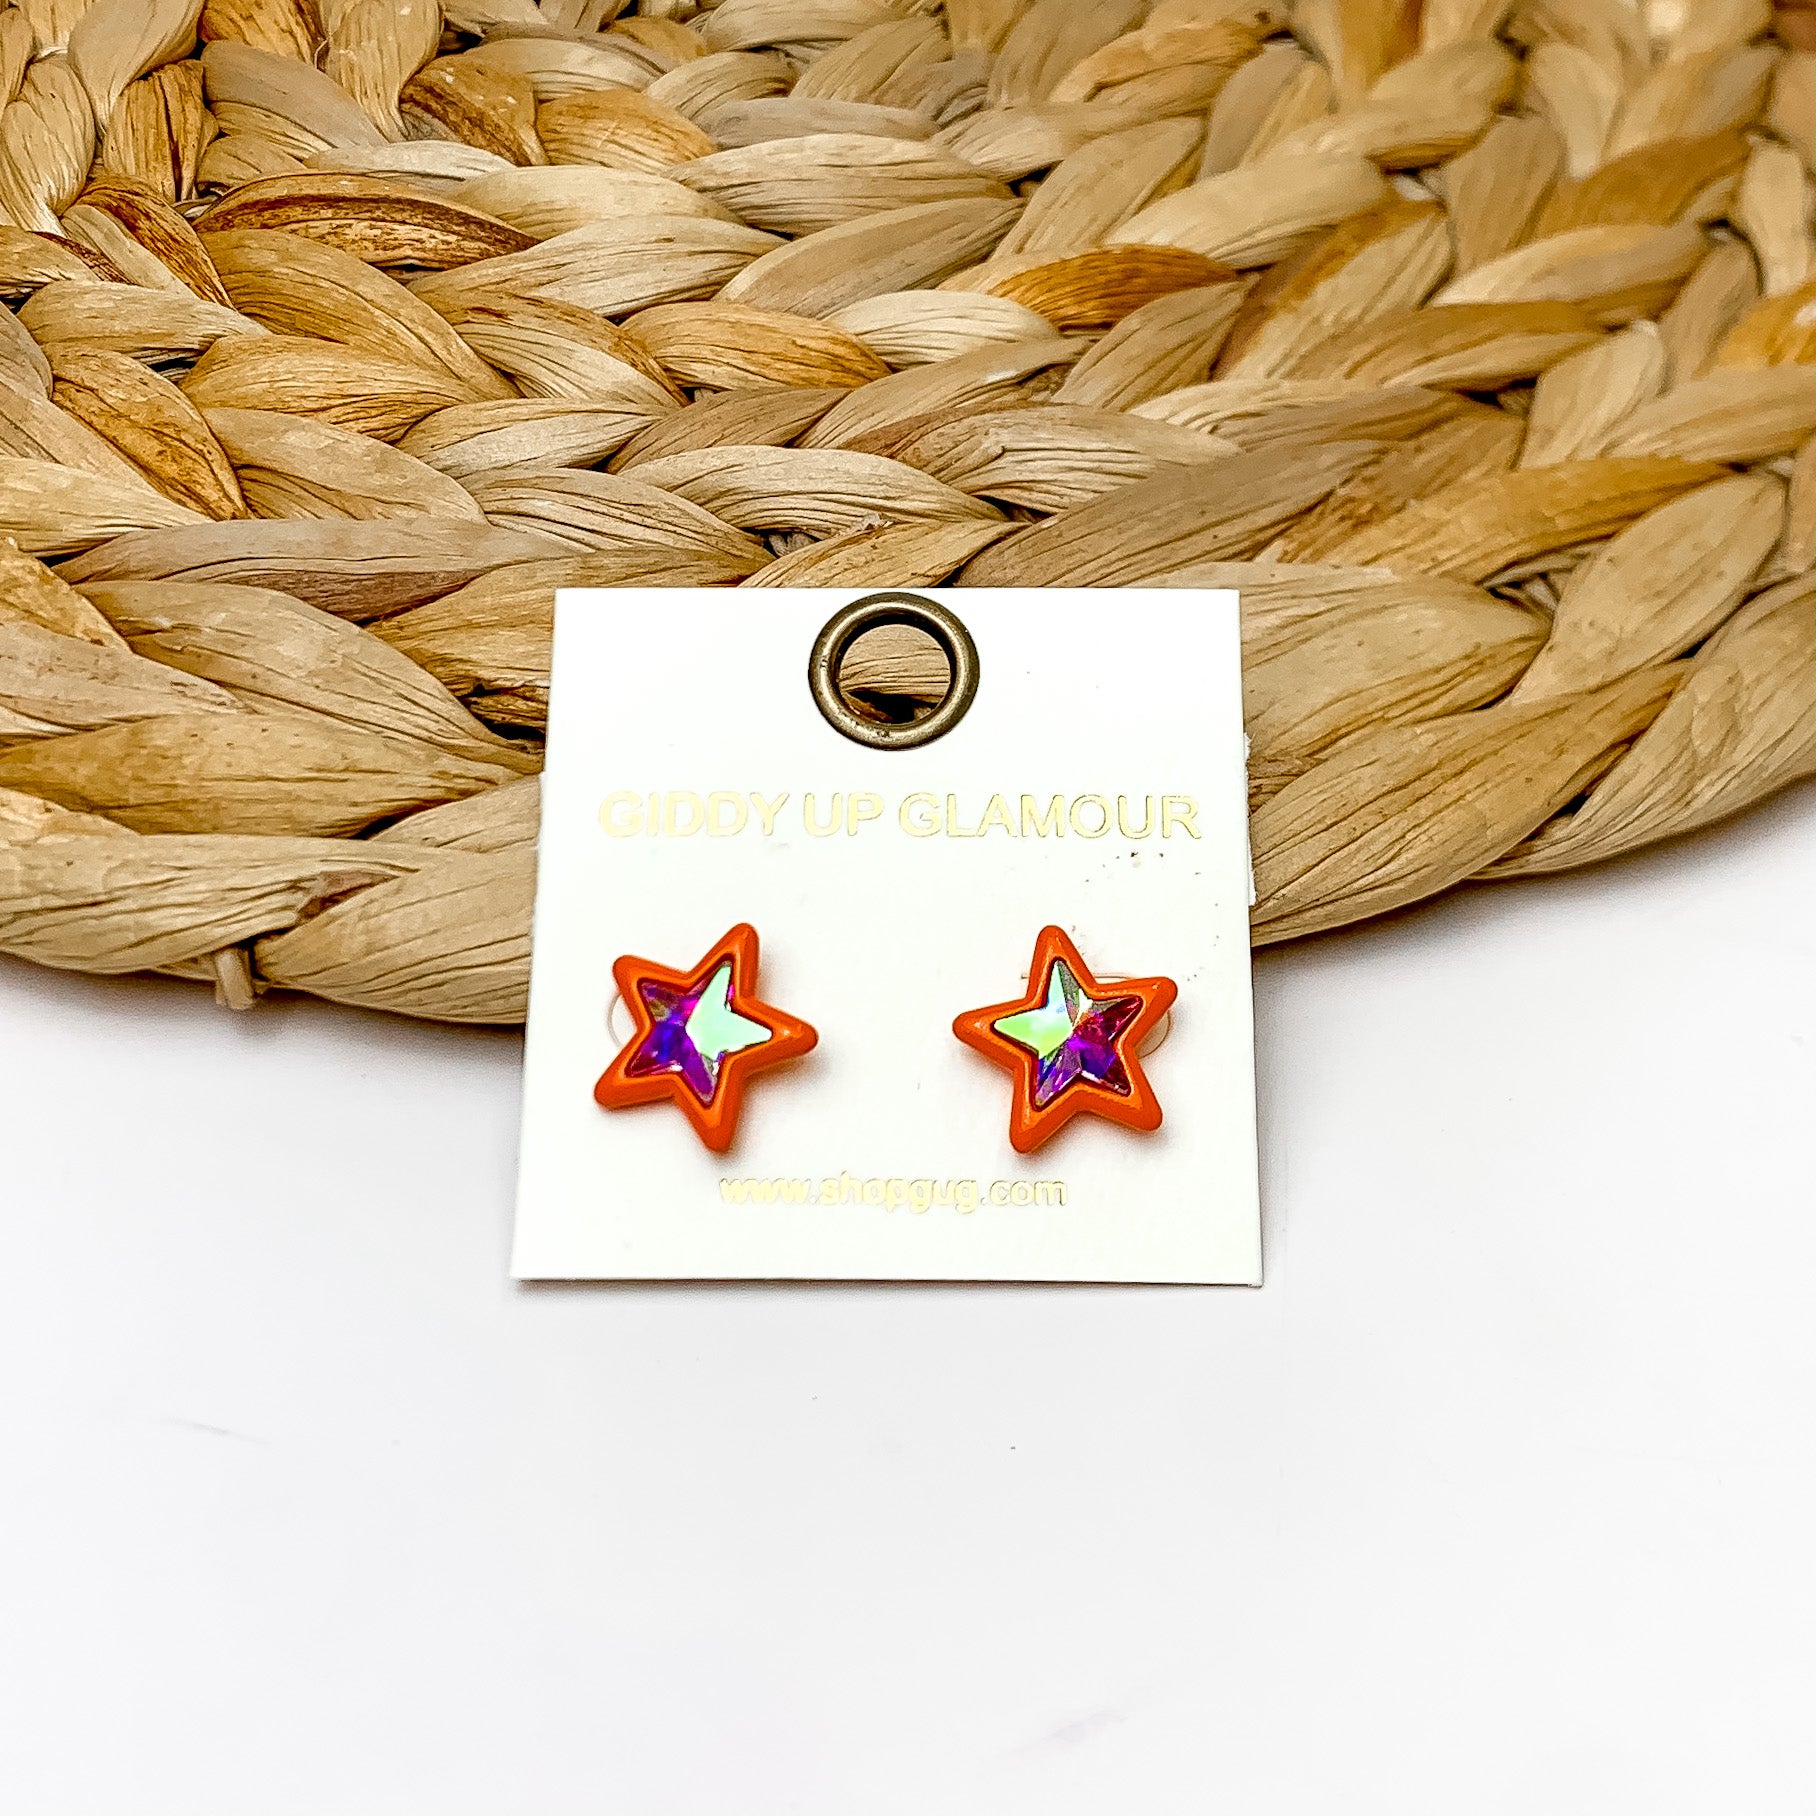 Star Stud Earrings in Orange With AB Crystals. Pictured on a white background with the earrings laying against a wicker piece.